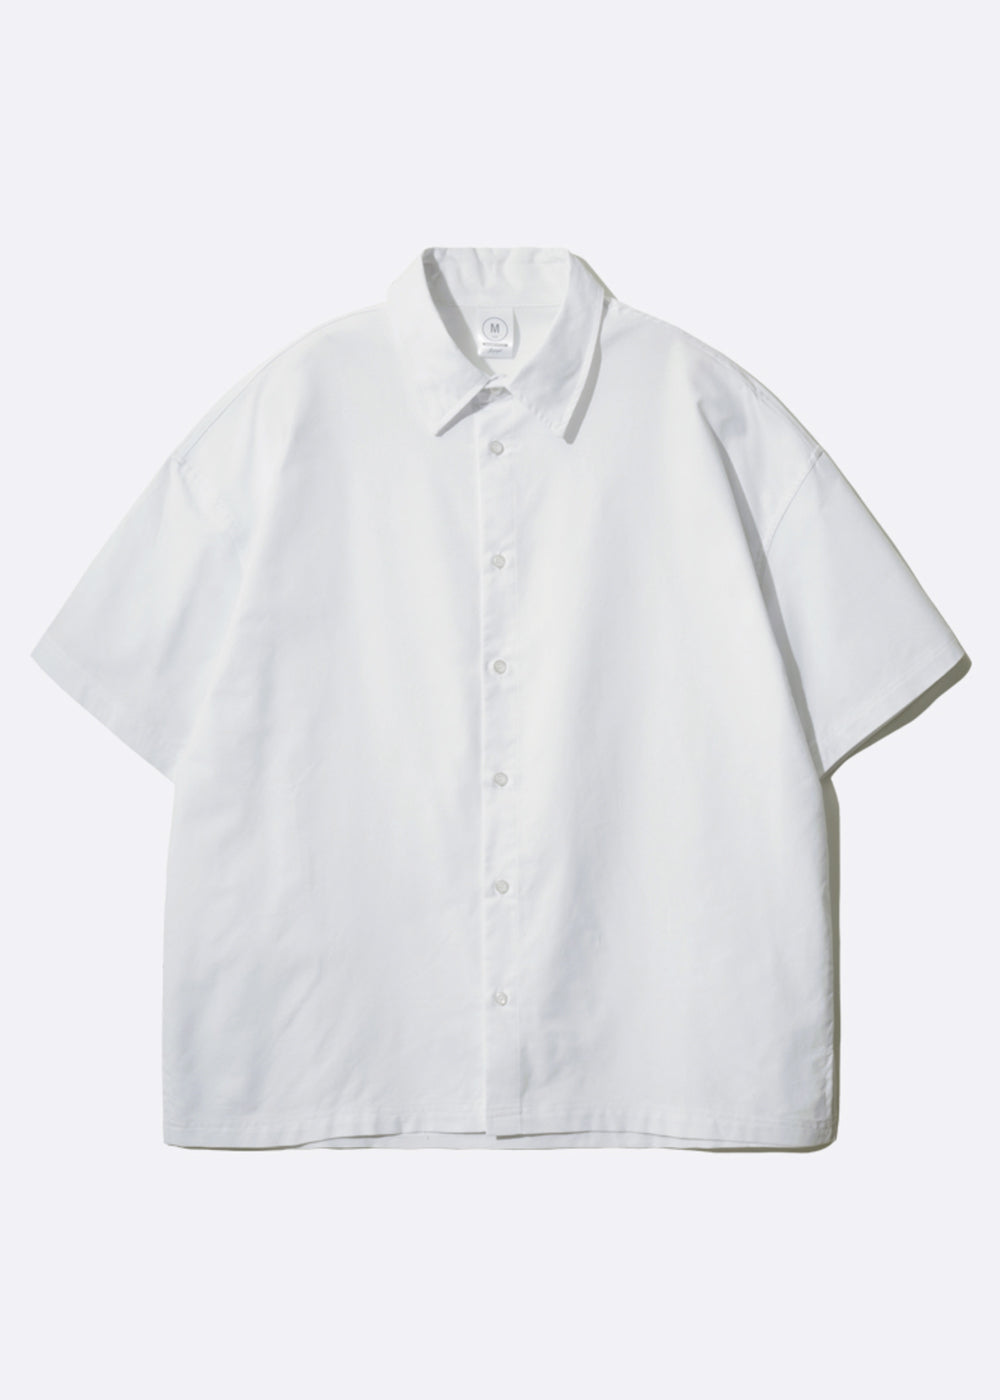 RELAXED FIT SHORT SLEEVE SHIRT IVORY